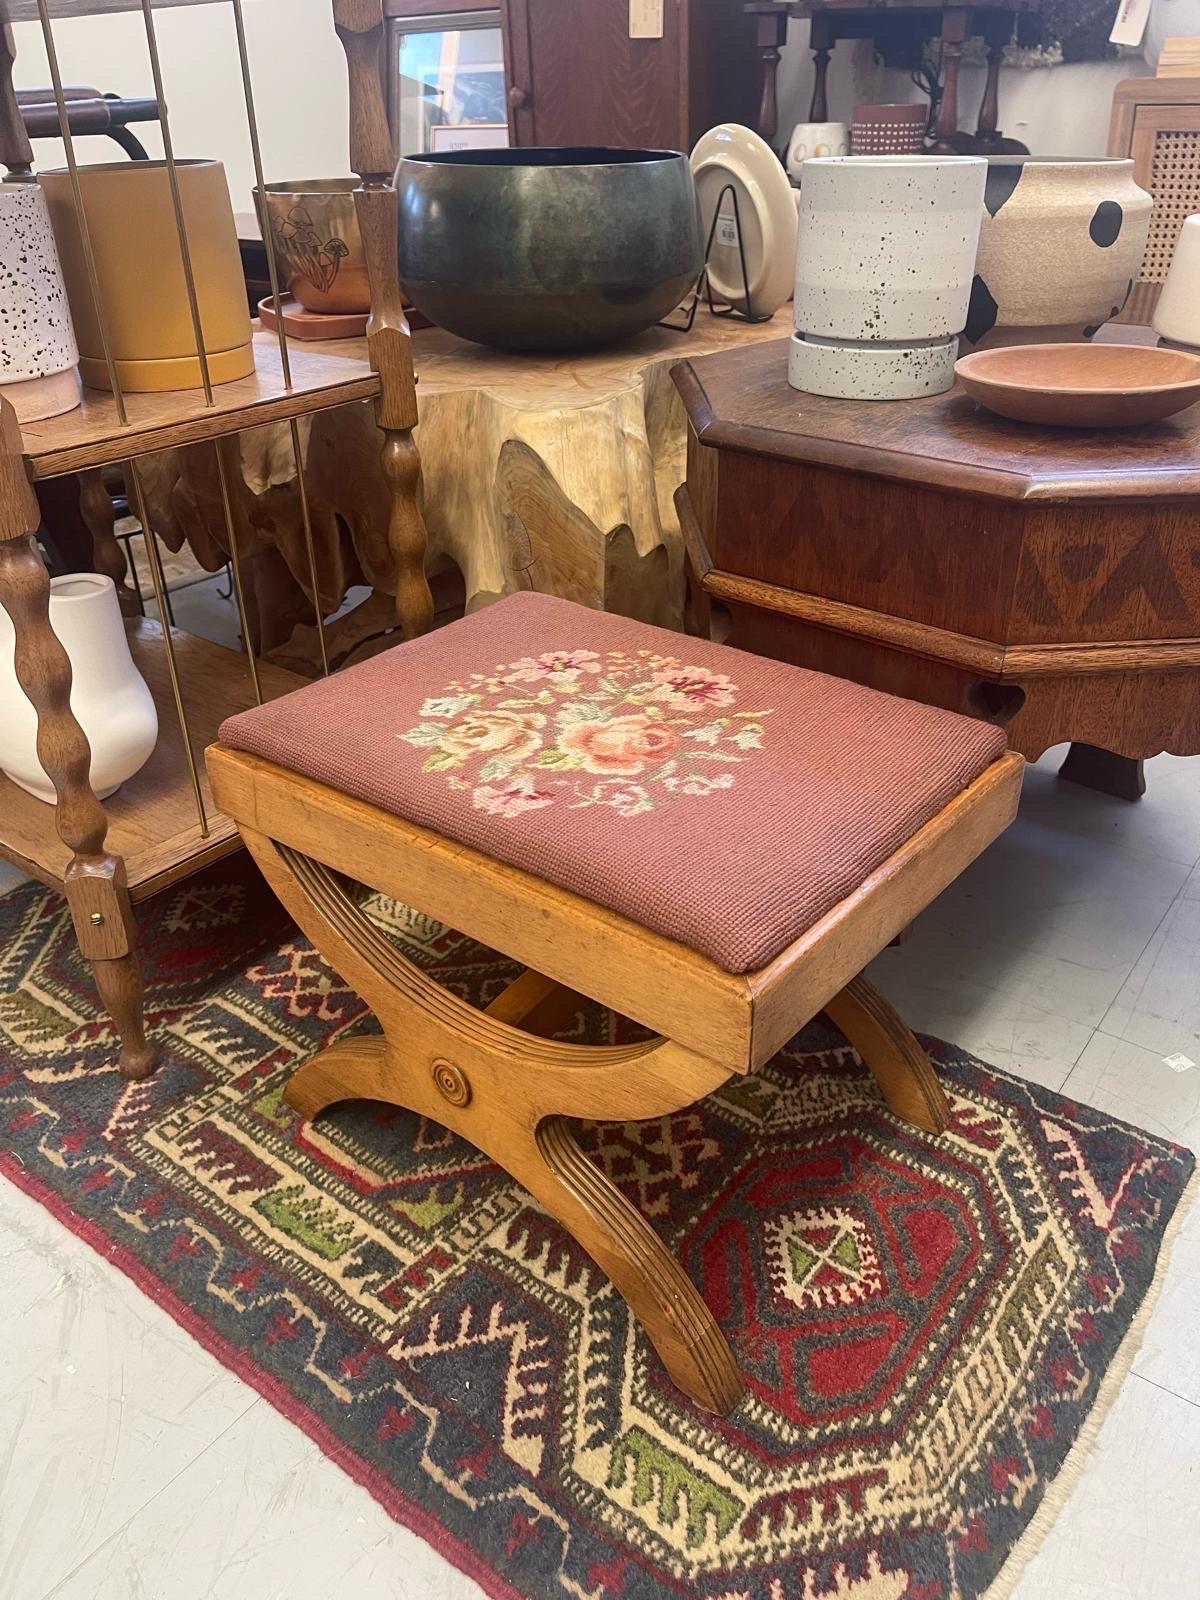 This Footstool has a beautiful ‘X’ frame base with sculpted wood detailing. The seat flips up and offer storage. Vintage condition consistent with age as Pictured.

Dimensions.  17 W ; 12 D ; 13H